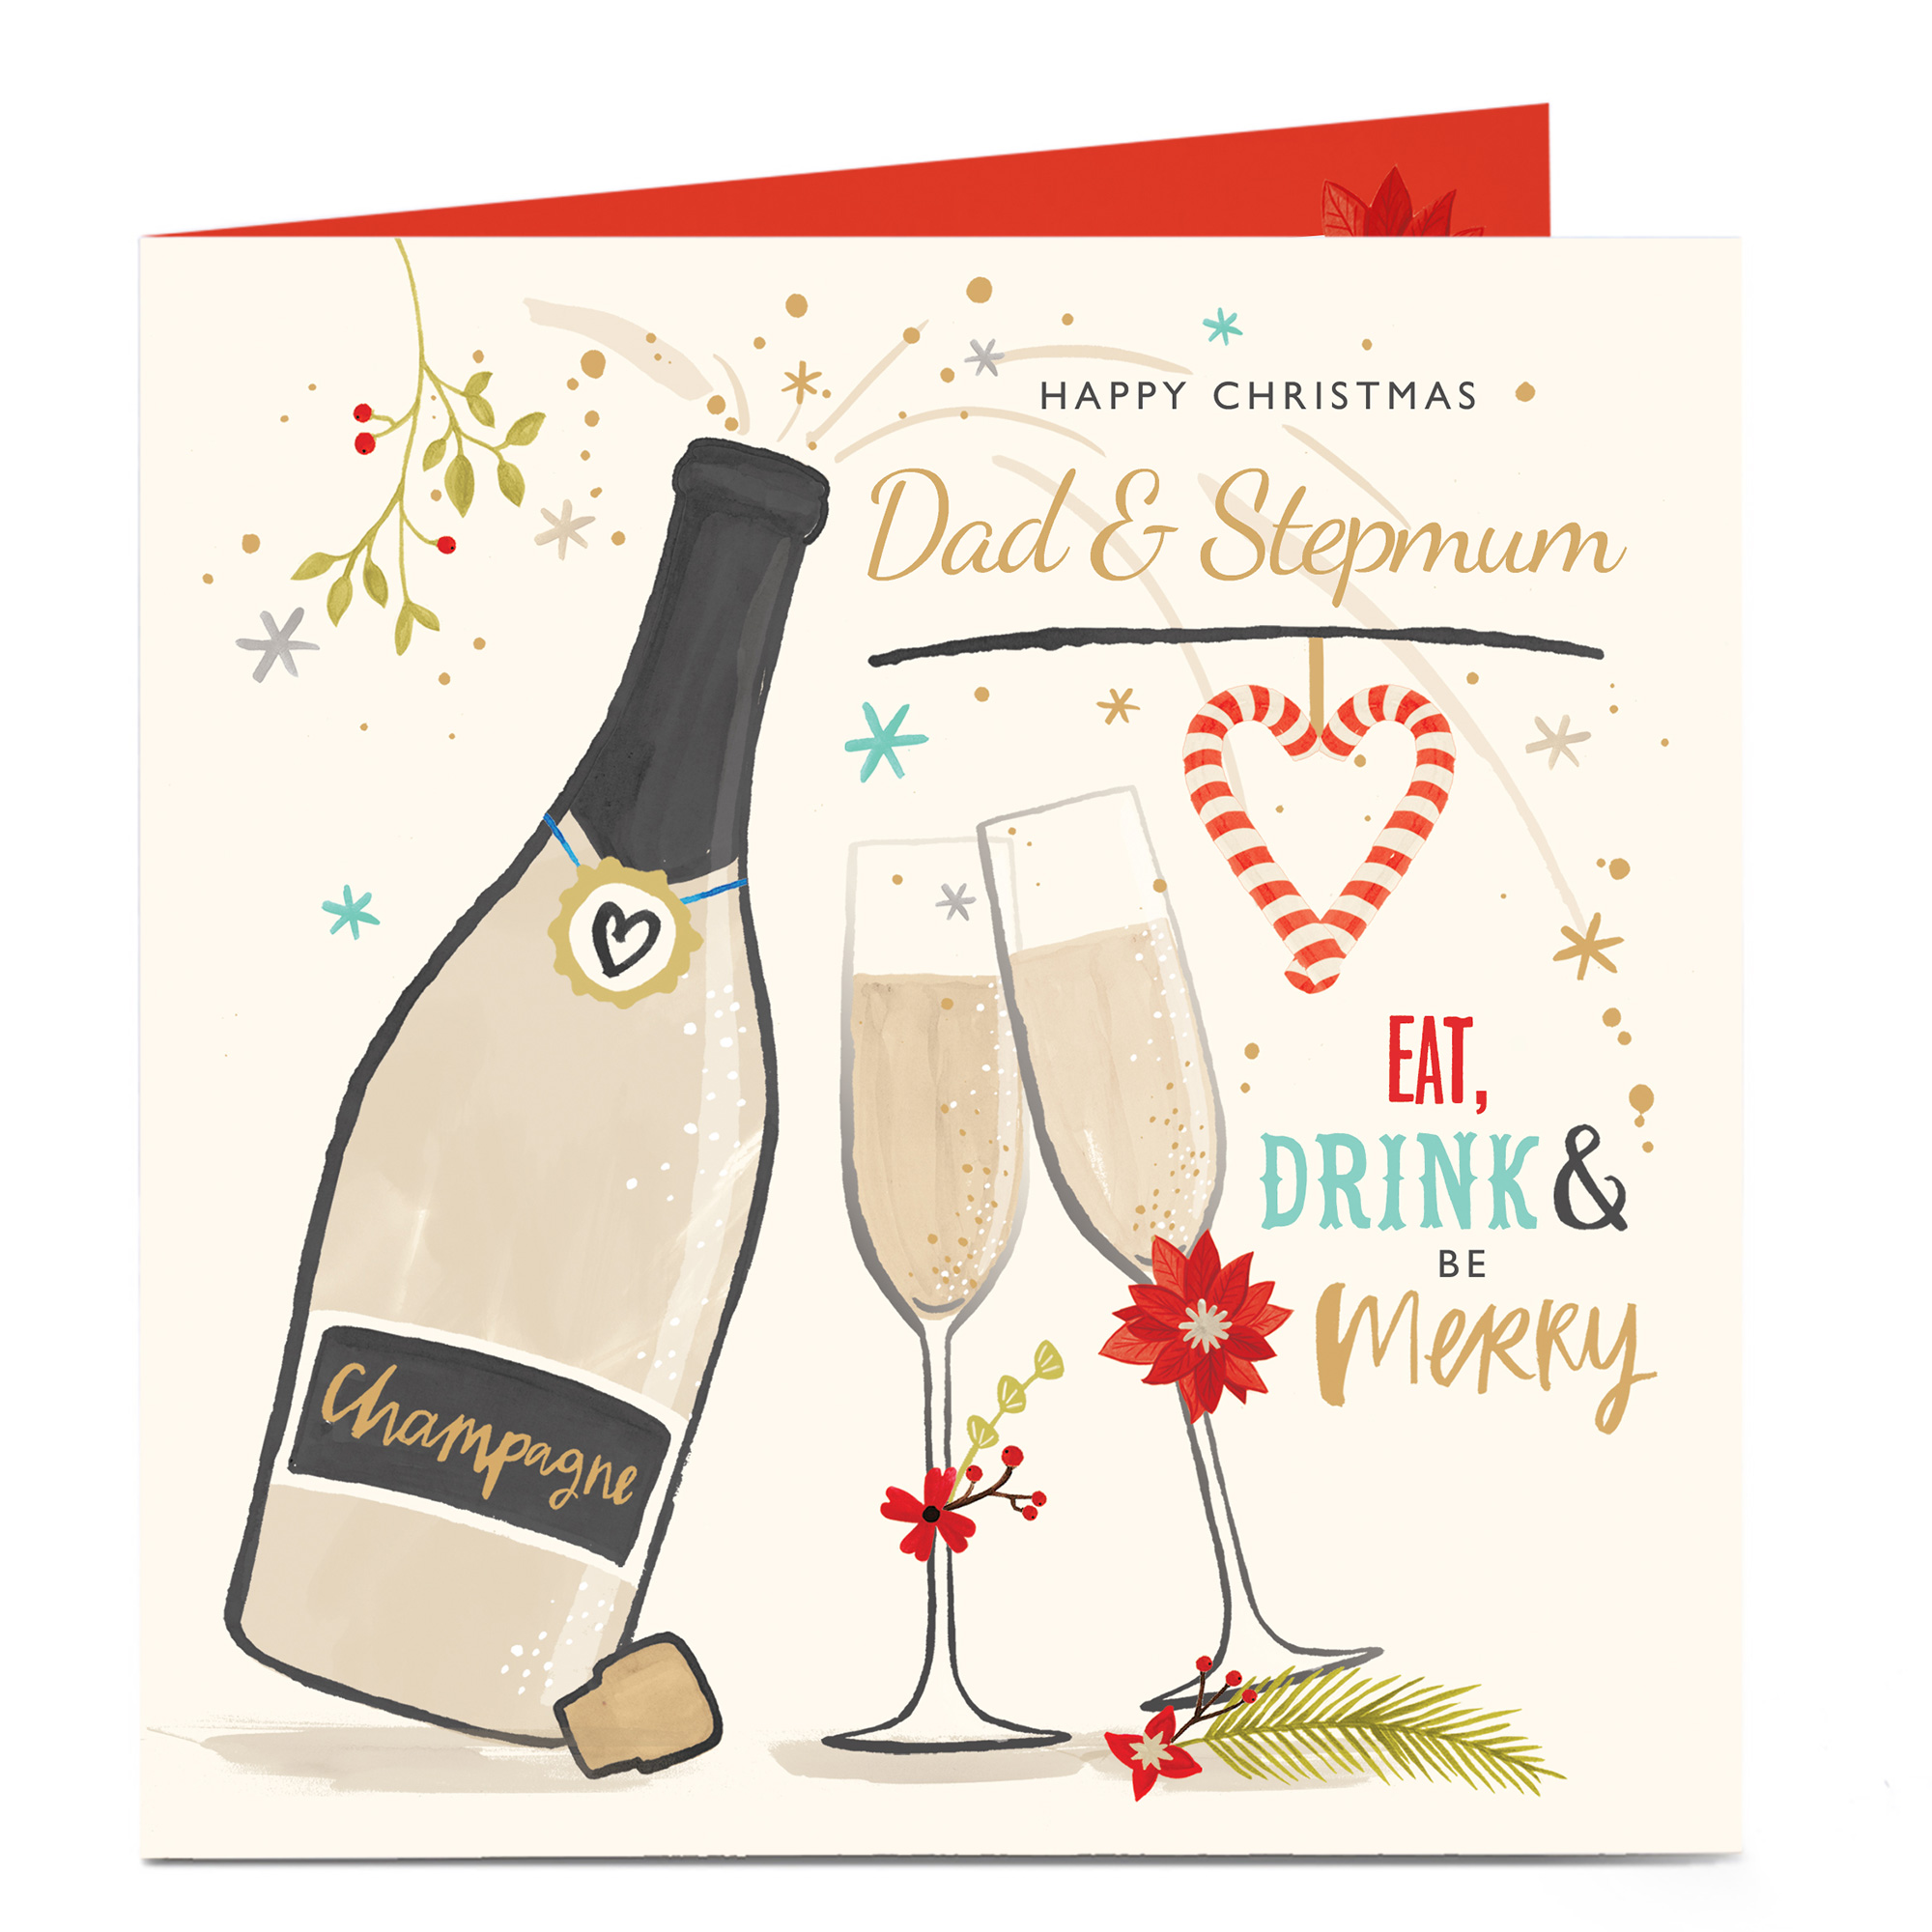 Personalised Christmas Card - Be Merry! Dad and Stepmum